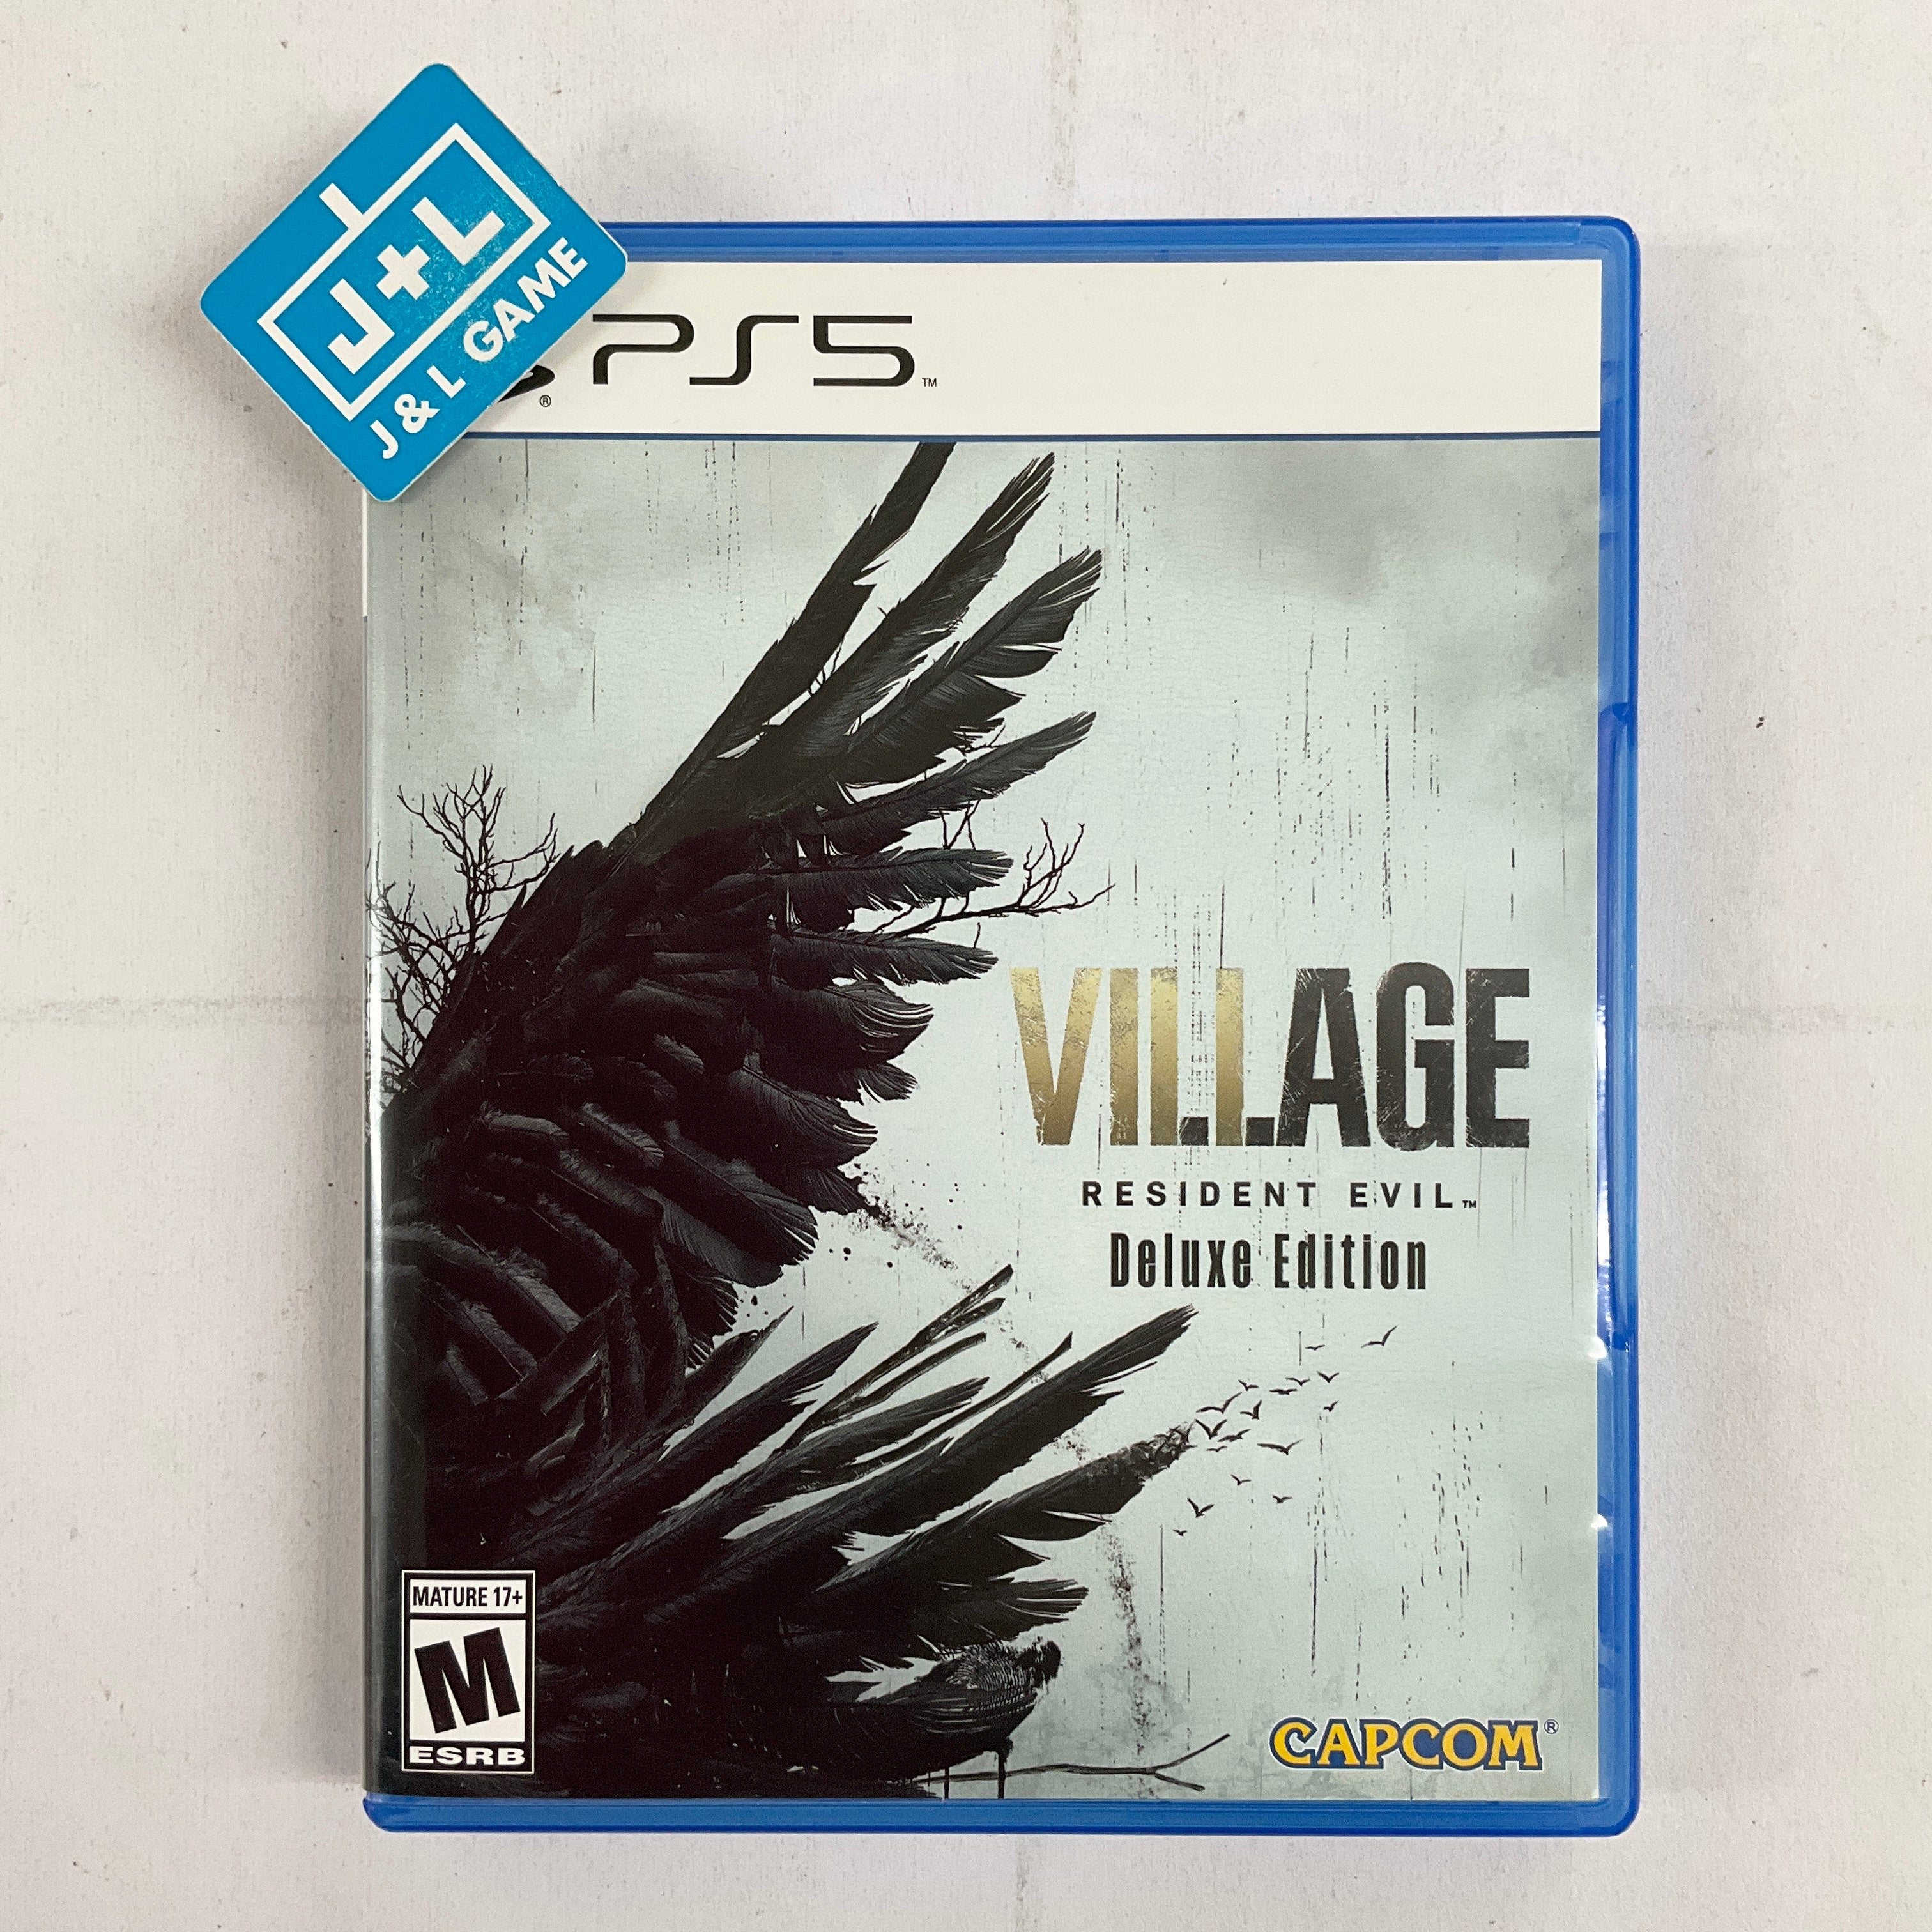 Capcom PS4 Resident Evil Village Deluxe Edition Video Game - US